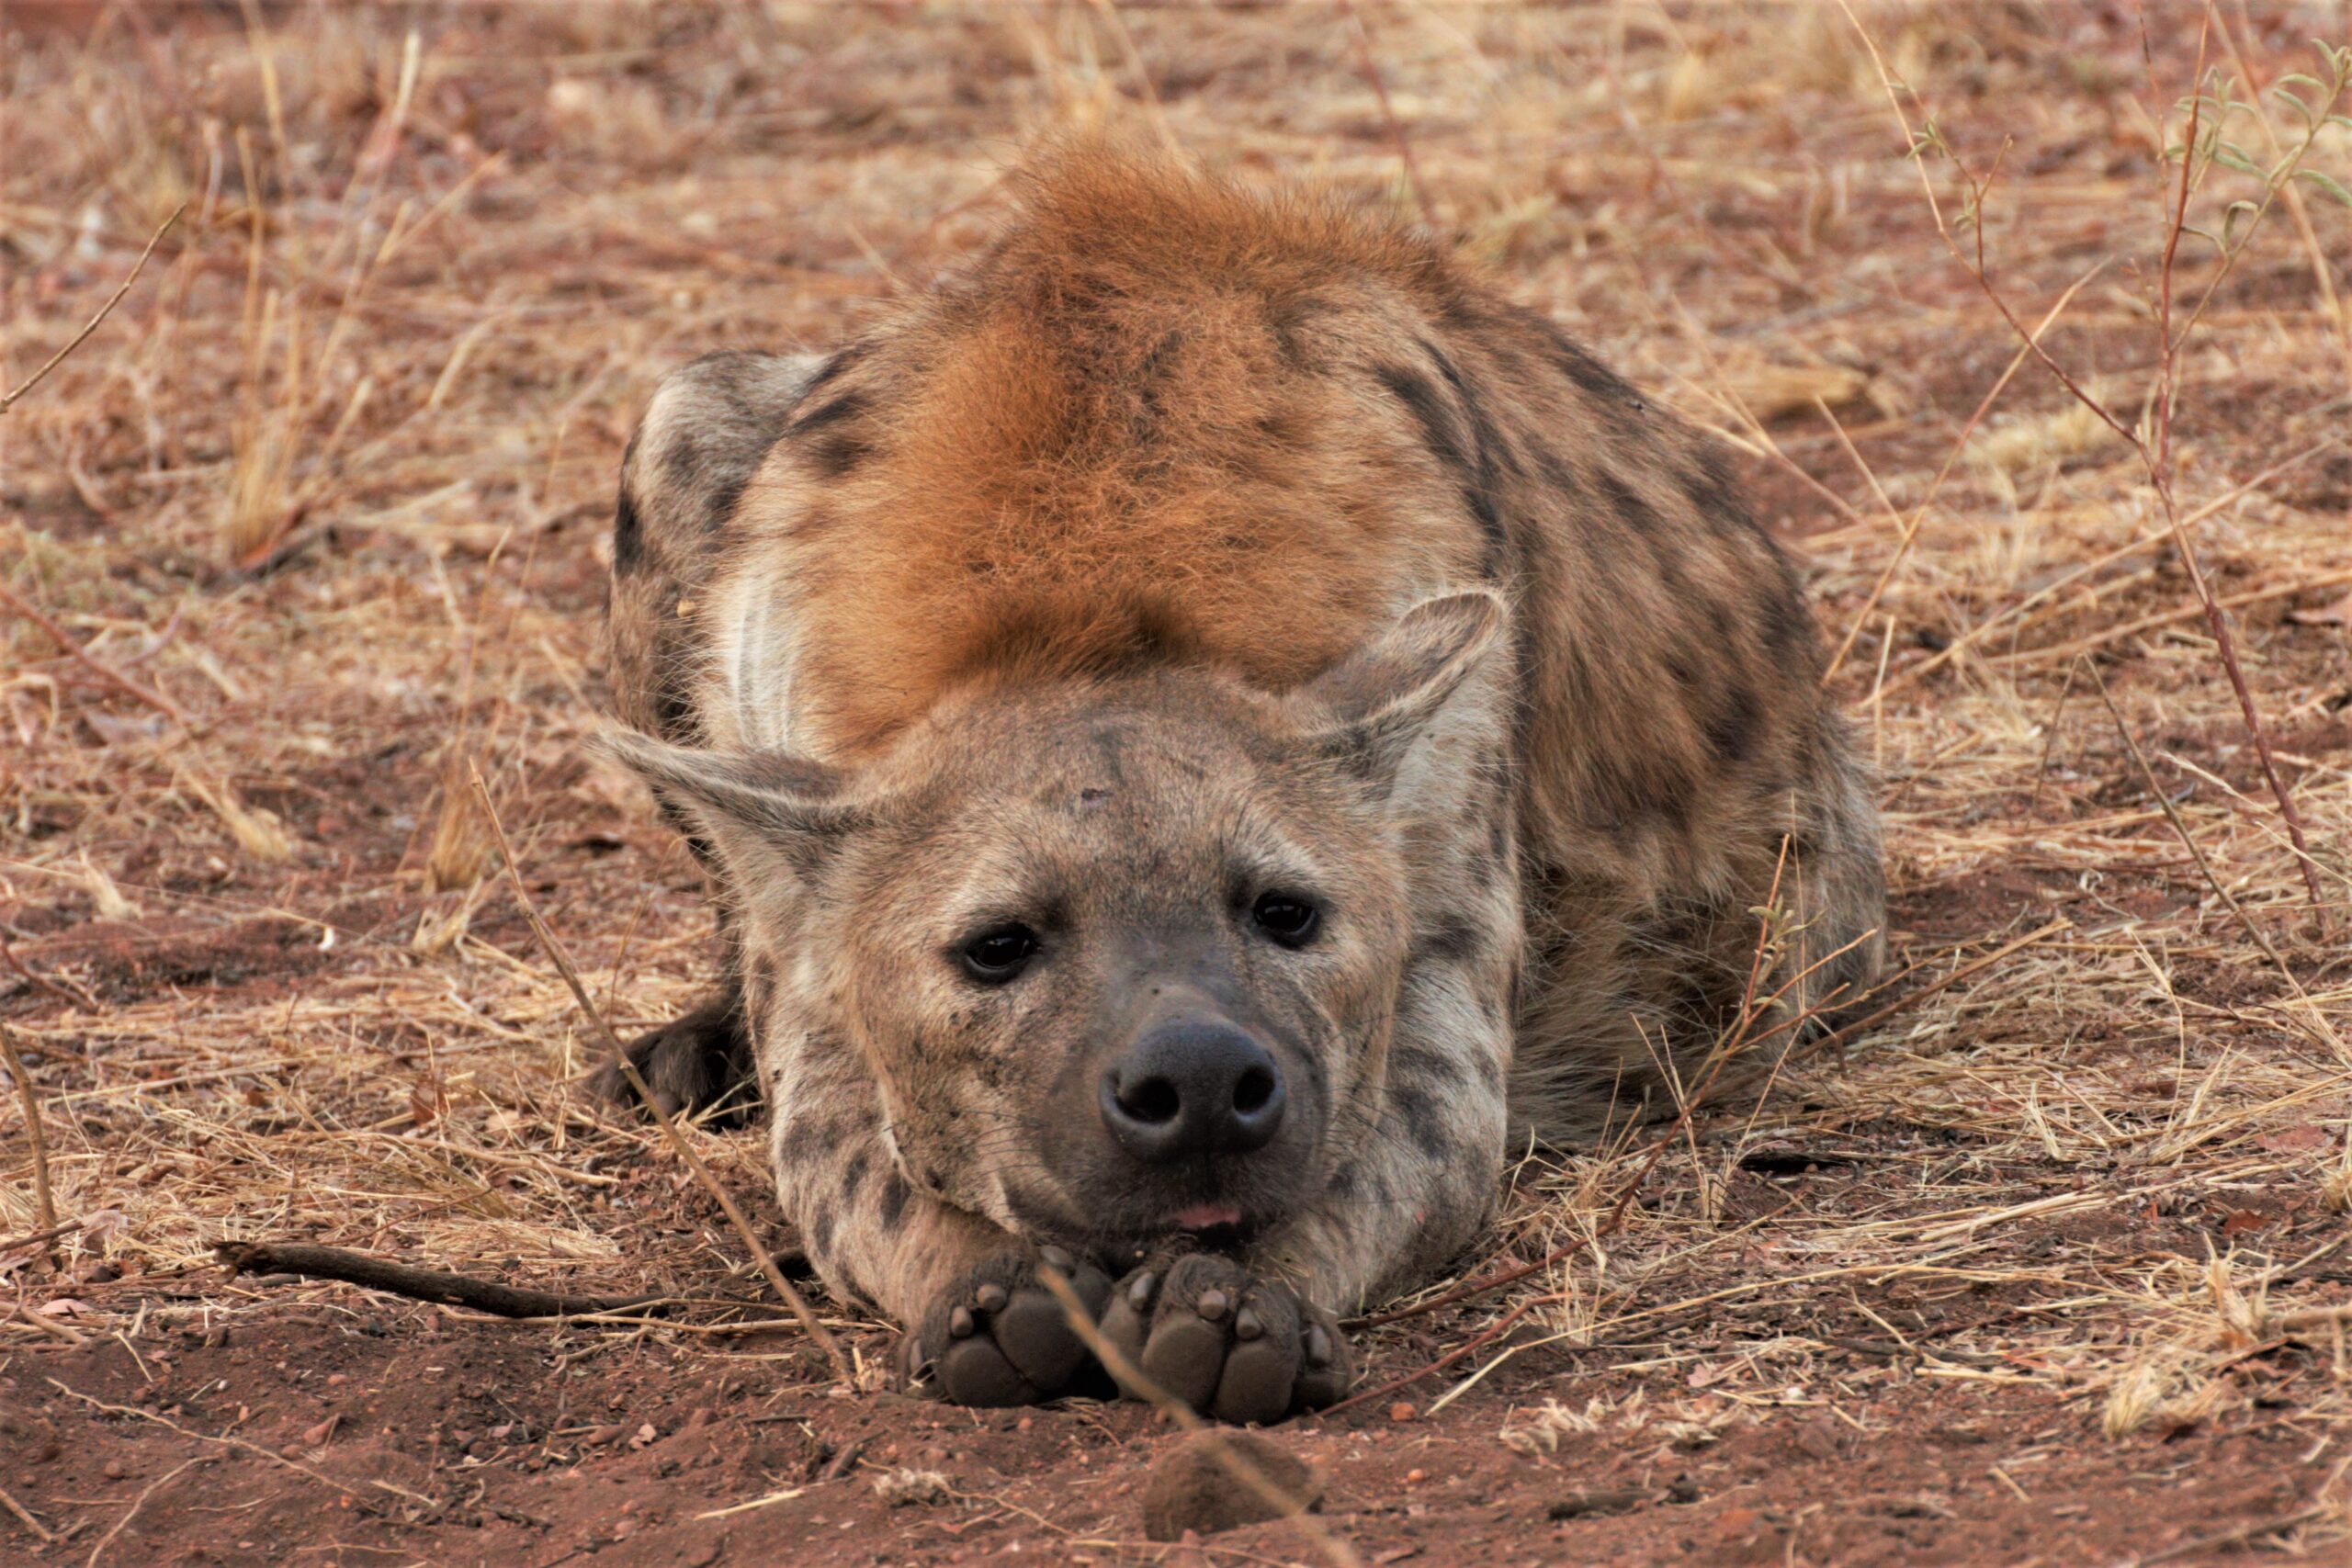 Queen hyena is the leader of the pack